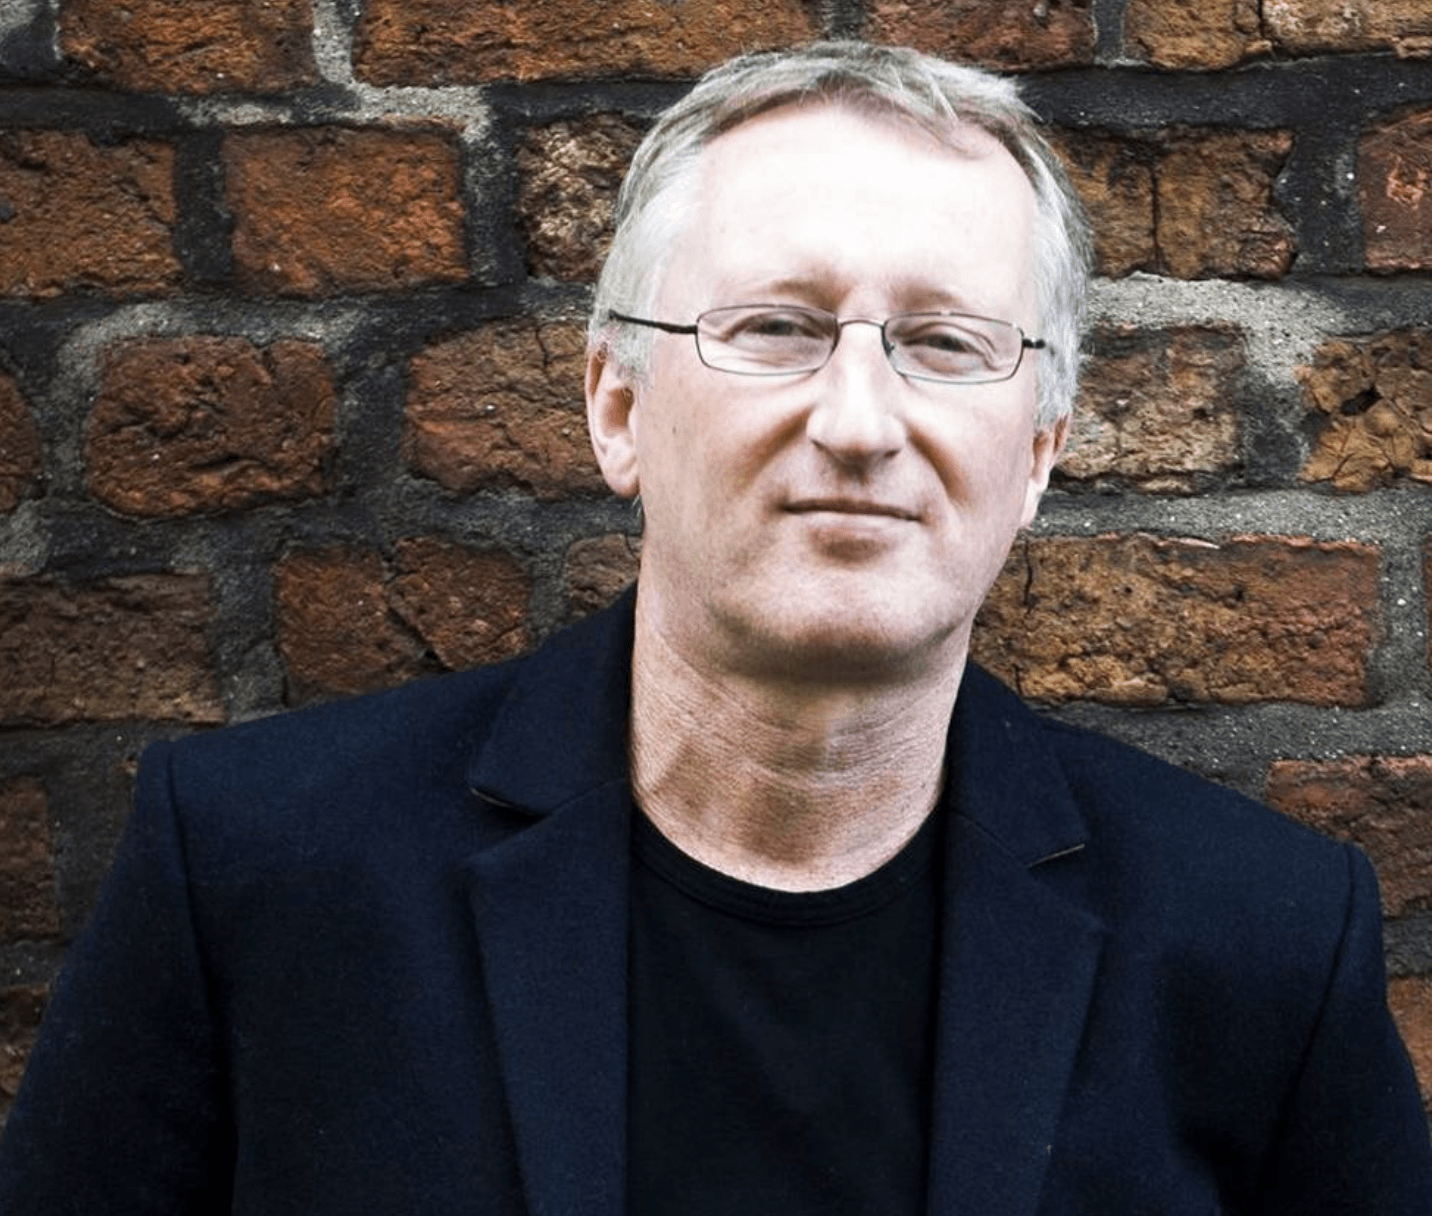 STORIES: Colin Bateman\'s early life is recalled through tales of gerbil breeding, punk music and the ups and downs of small-town journalism